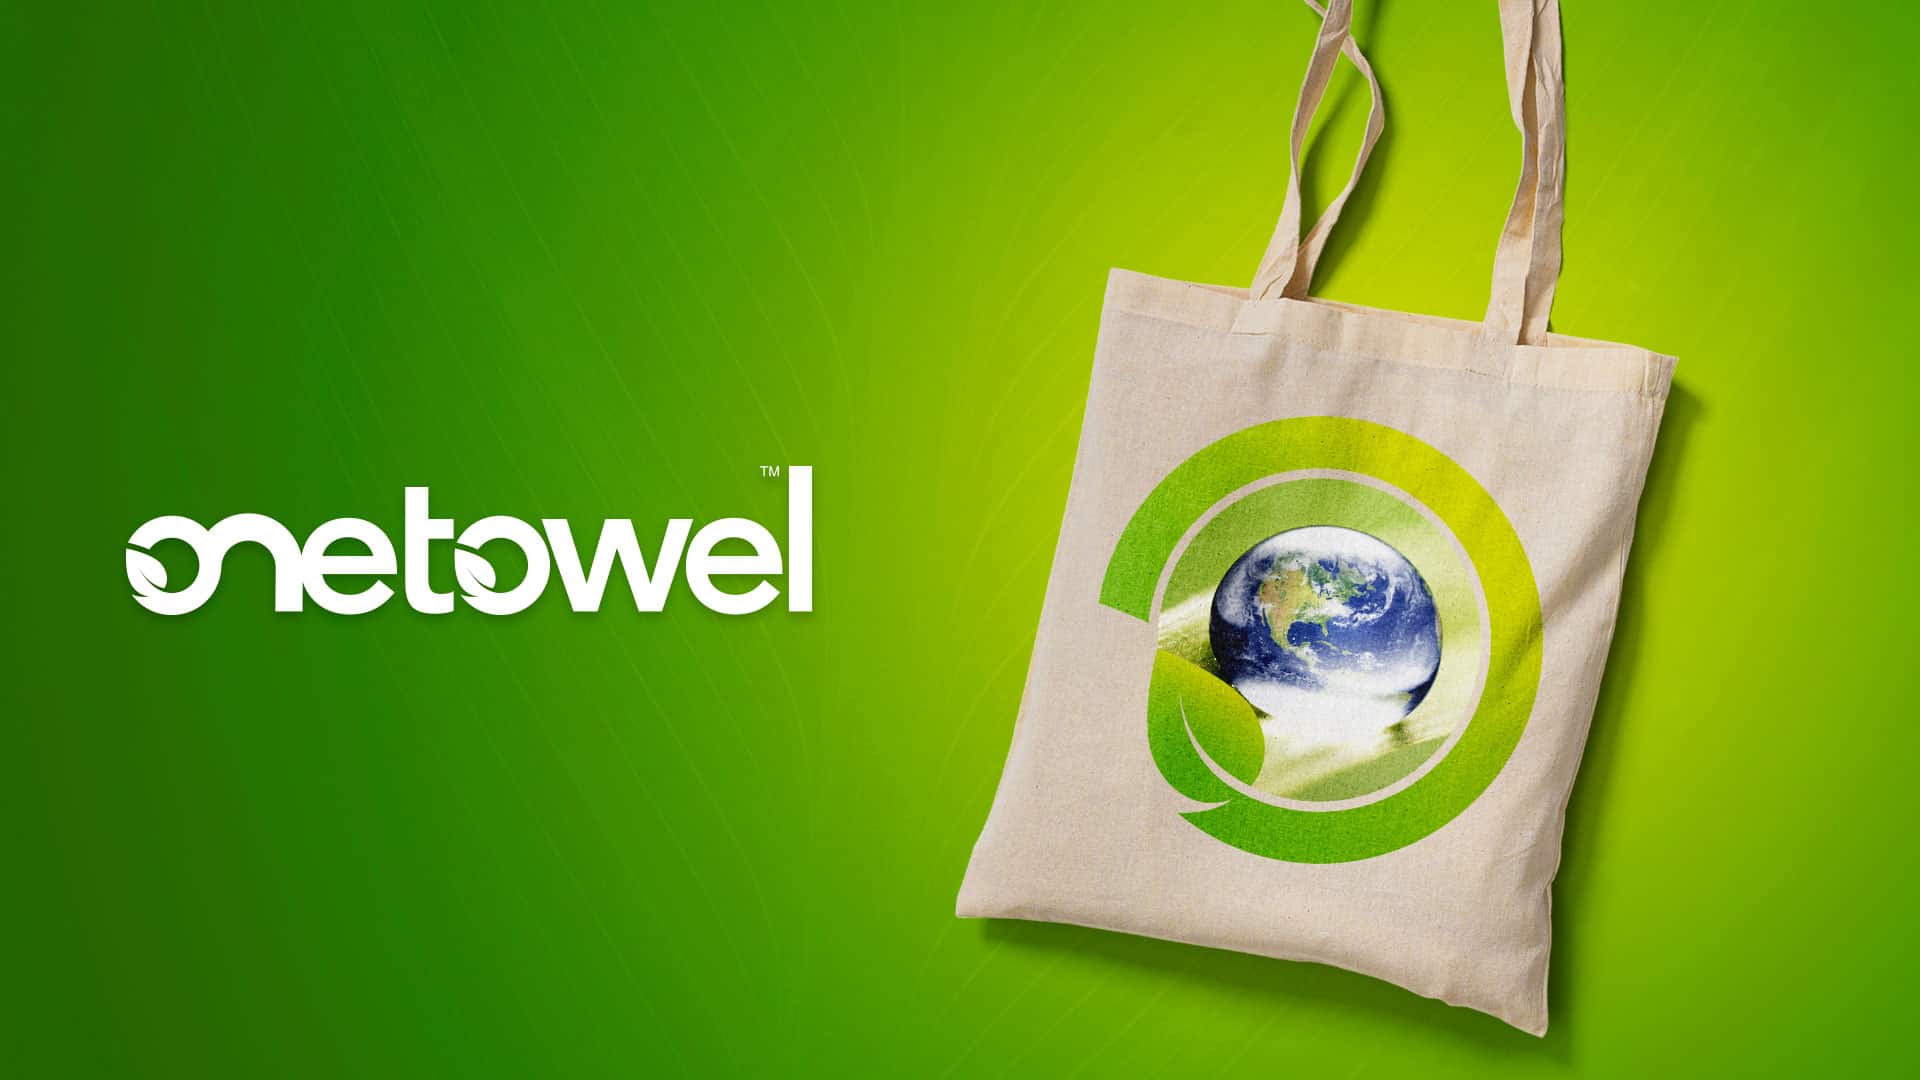 Branded tote bags for OneTowel designed by Essex creative agency Swan Creative